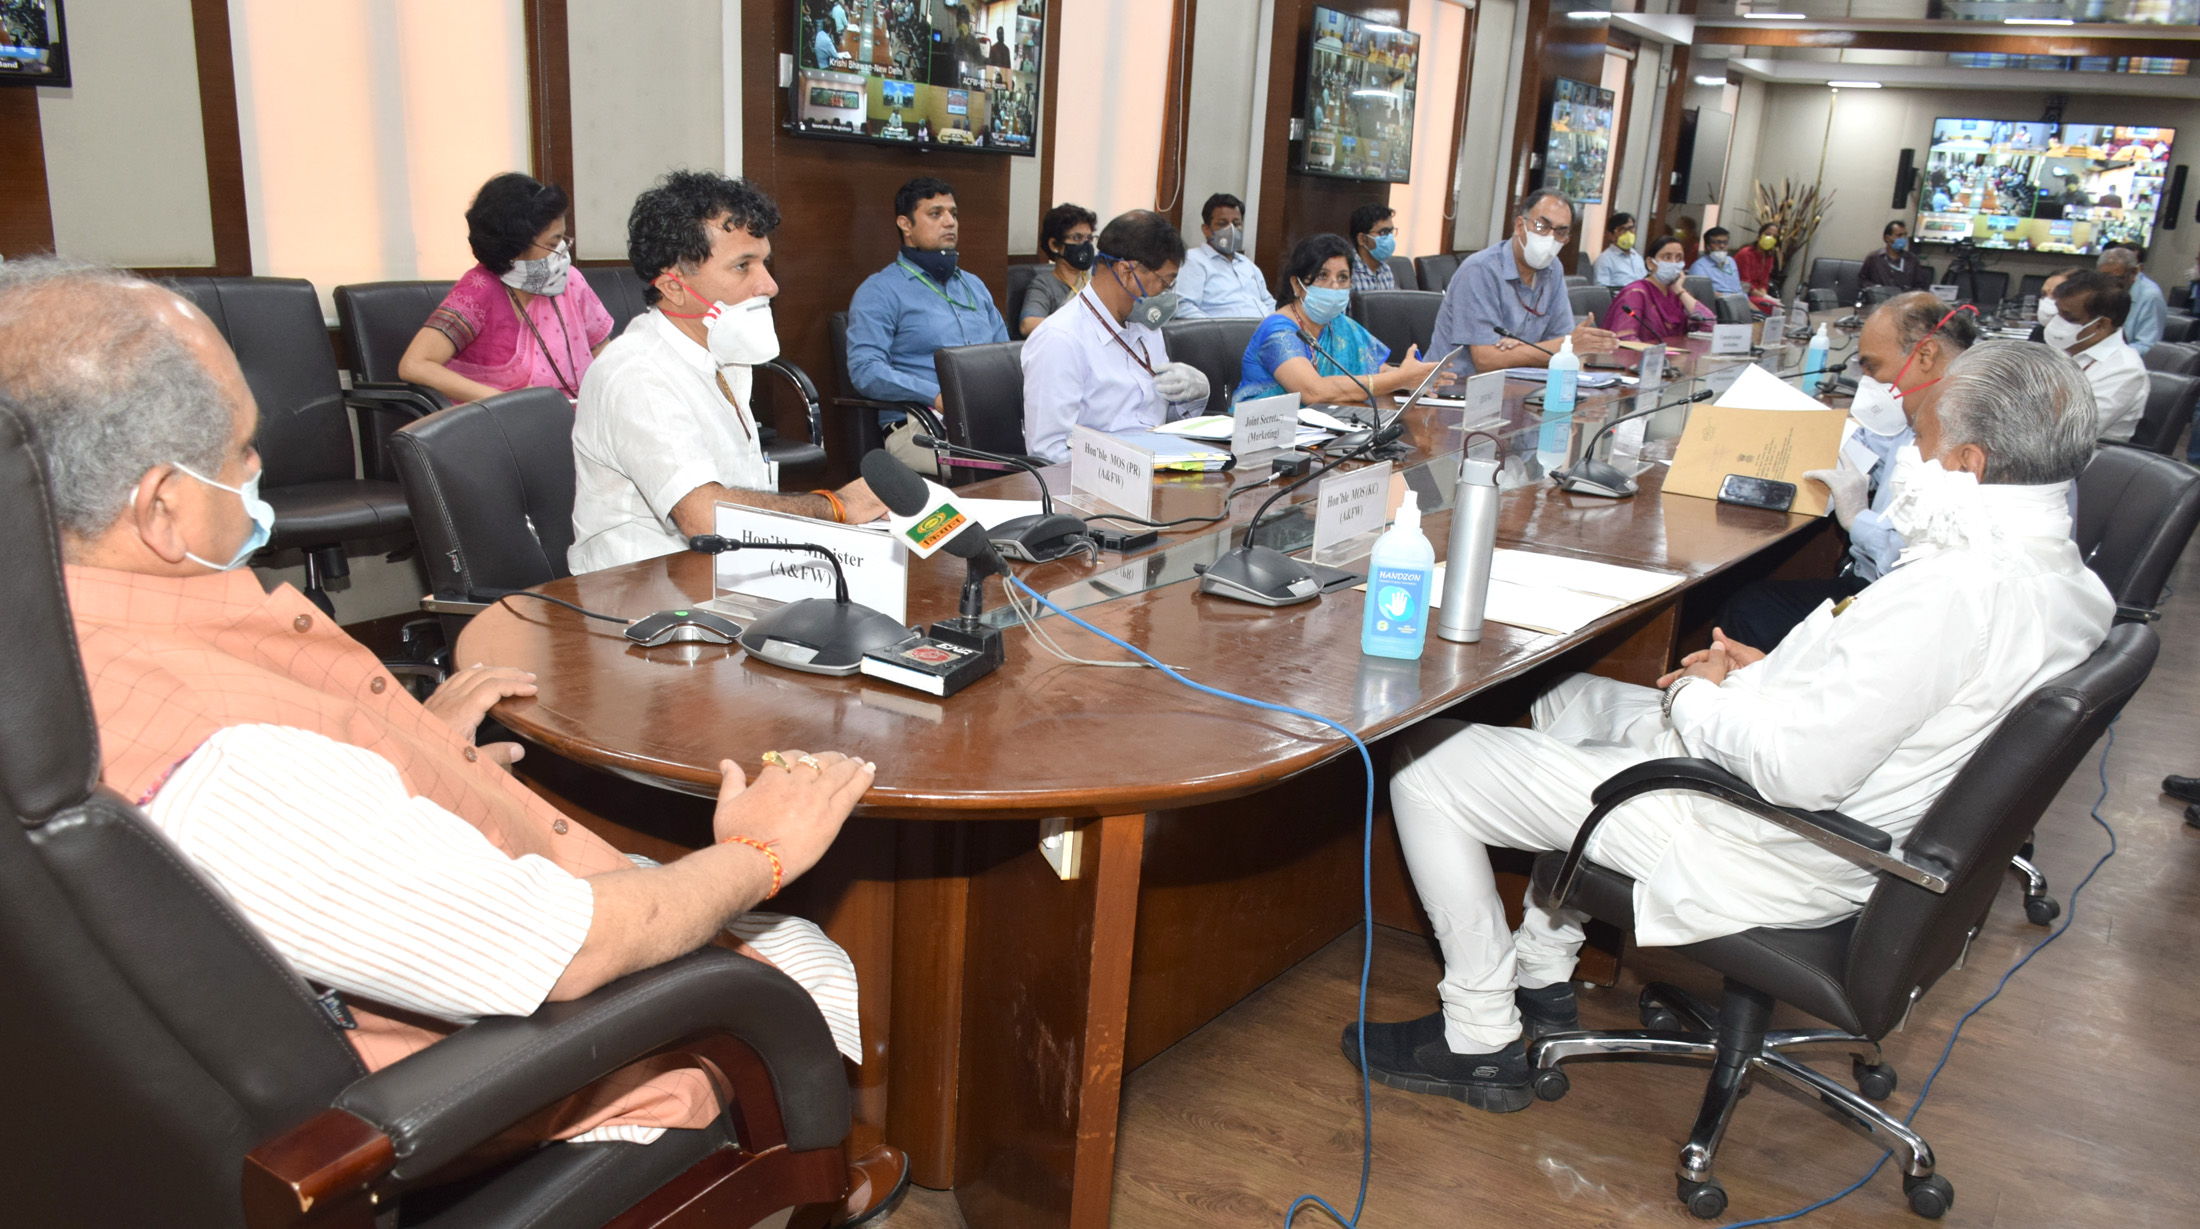 The Union Minister for Minority Affairs and Chairman, Central Waqf Council, Shri Mukhtar Abbas Naqvi addressing the CEOs, Chairmen of state Waqf boards through video conferencing, in New Delhi on April 16, 2020.